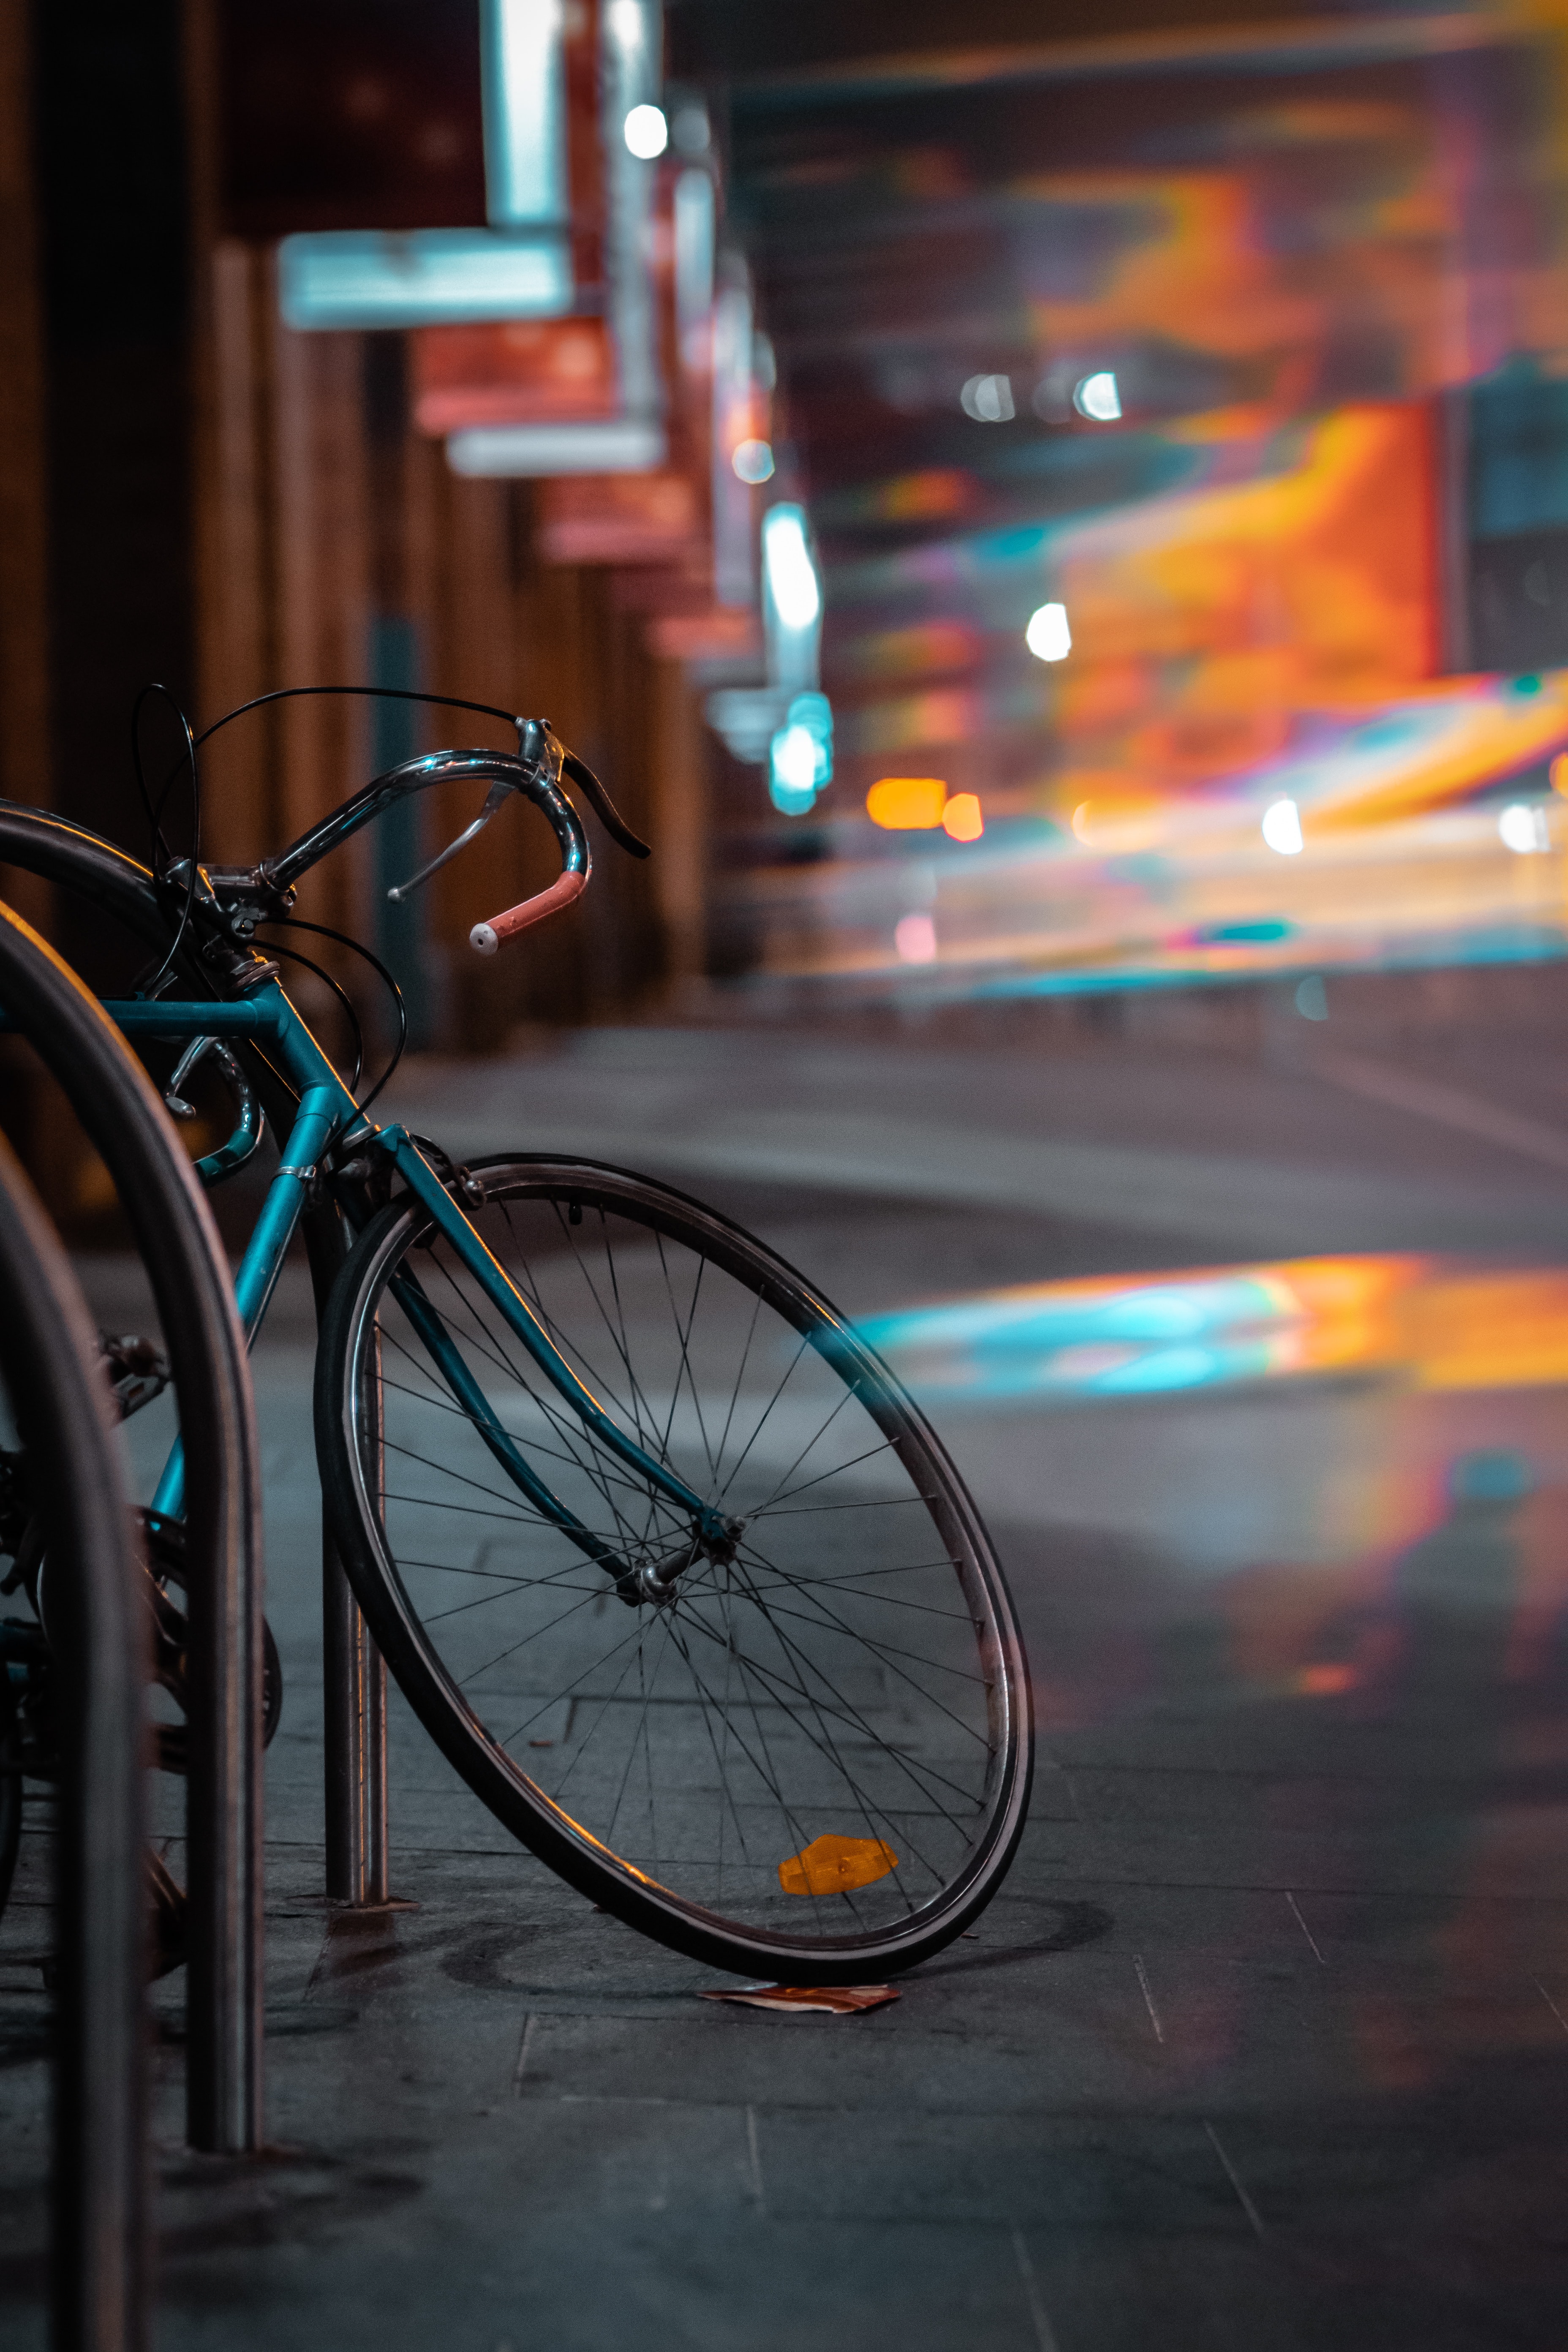 blur, miscellaneous, bicycle, transport, glare, miscellanea, smooth, evening, wheels iphone wallpaper